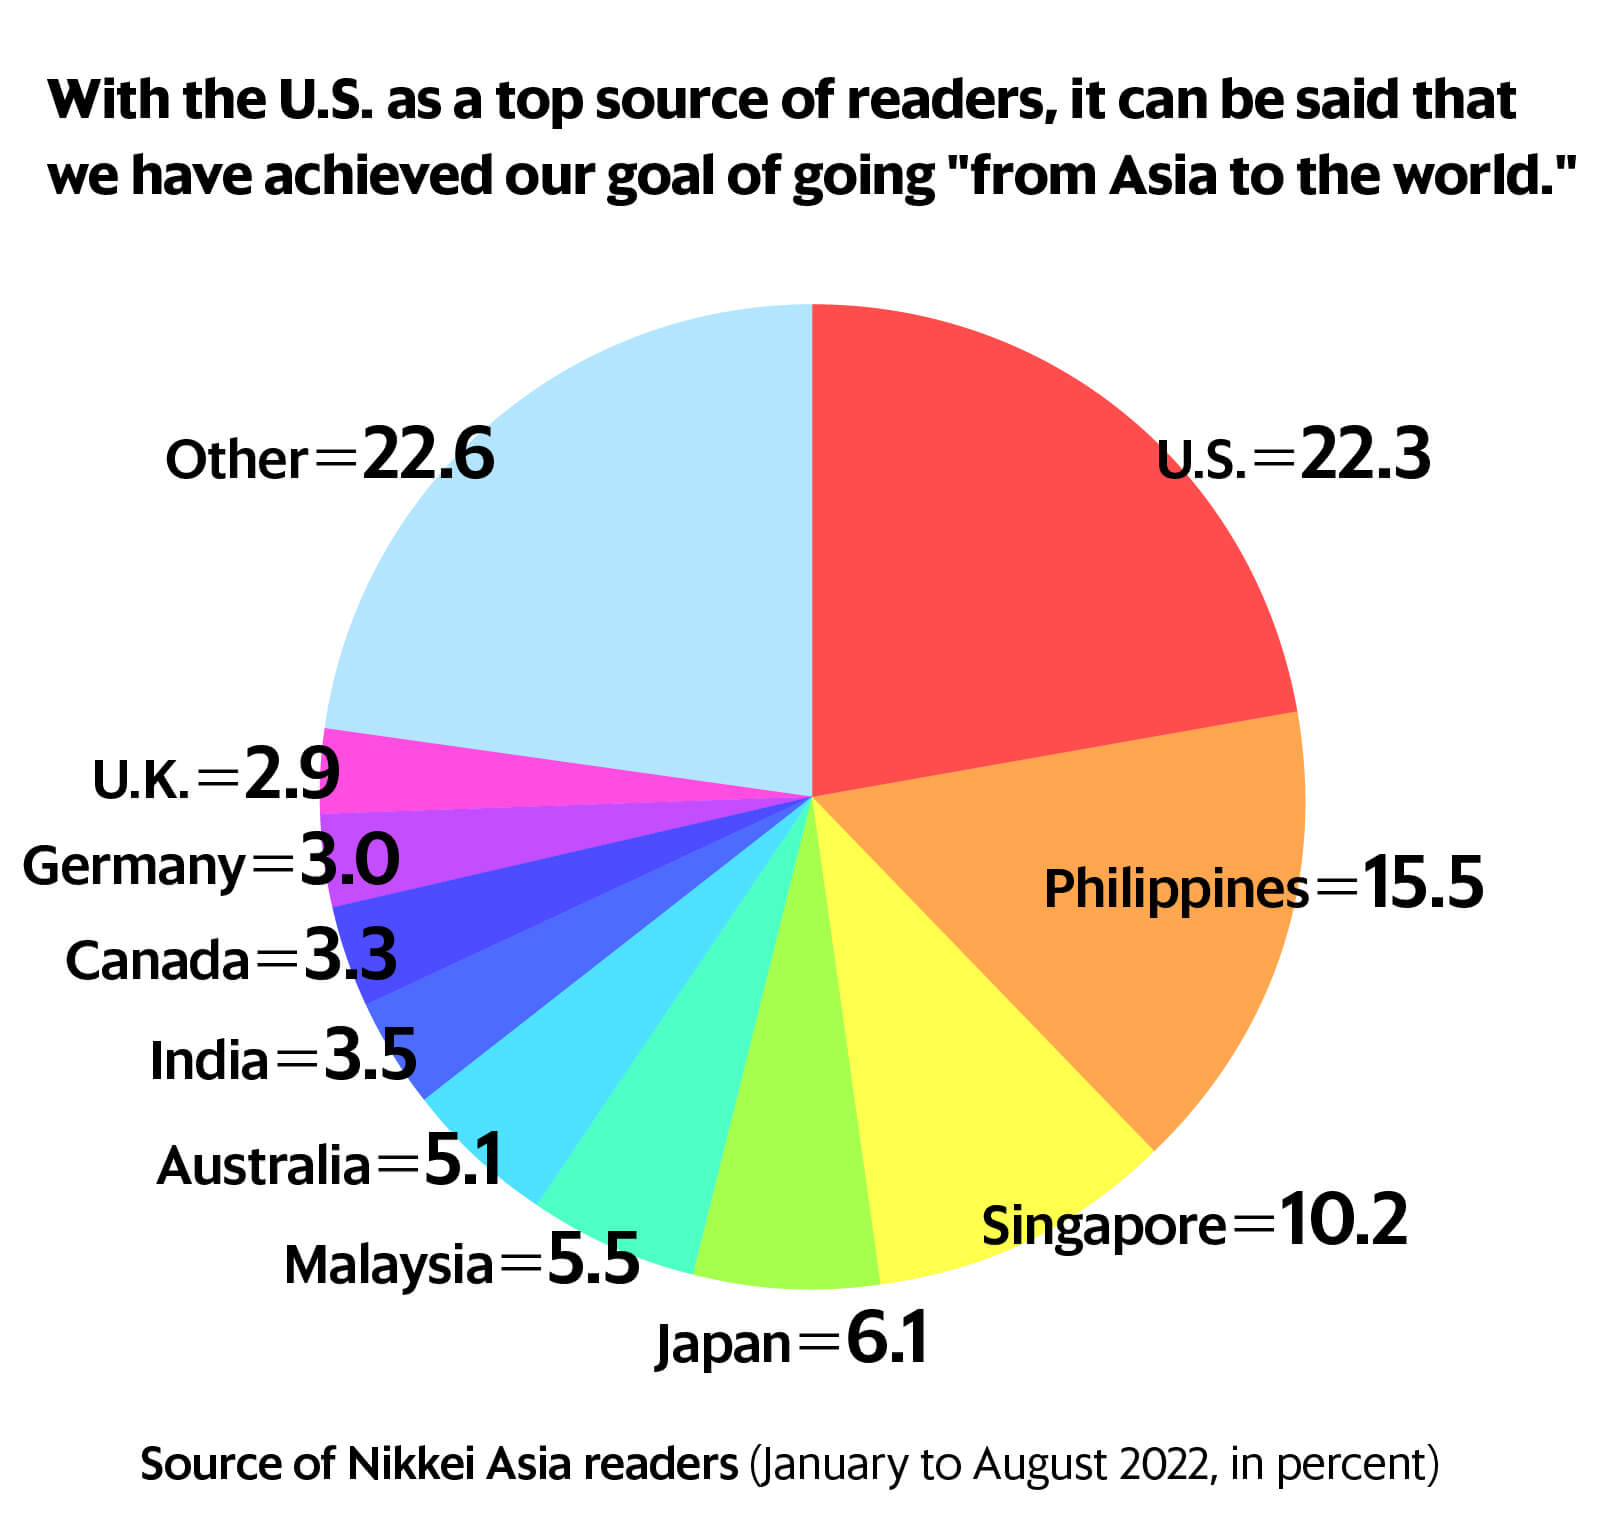 With the U.S. as a top source of readers, it can be said that we have achieved our goal of going "from Asia to the world."